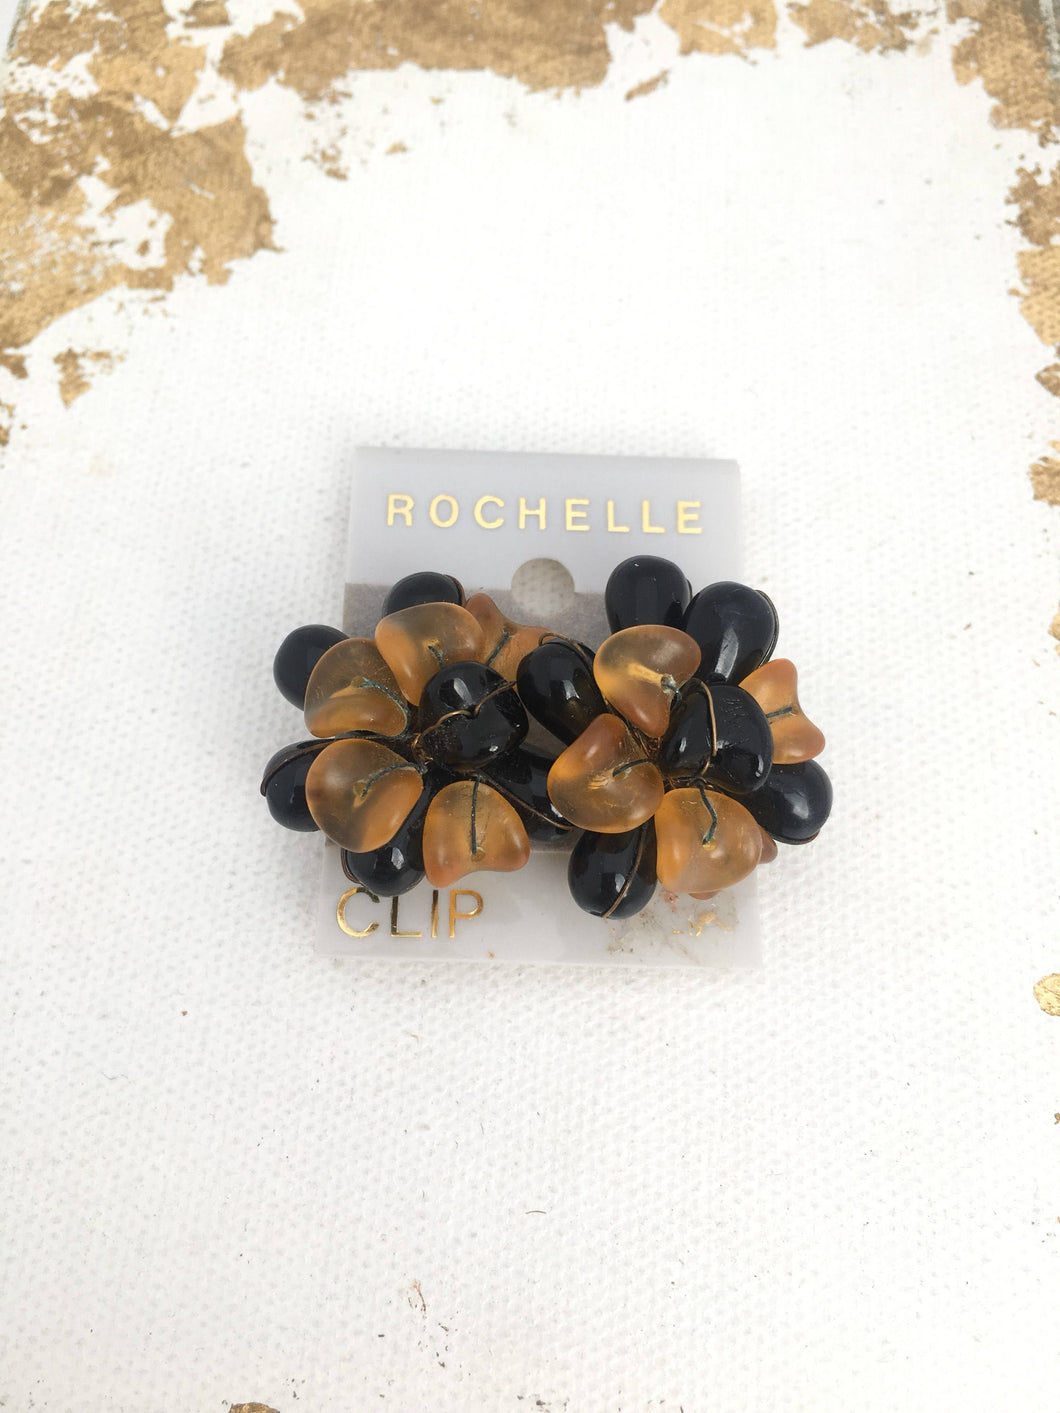 Clip on vintage earrings on original card with golden lettering spelling out ROCHELLE and CLIP. The earrings are layered plastic petal forms in black and orange plastic